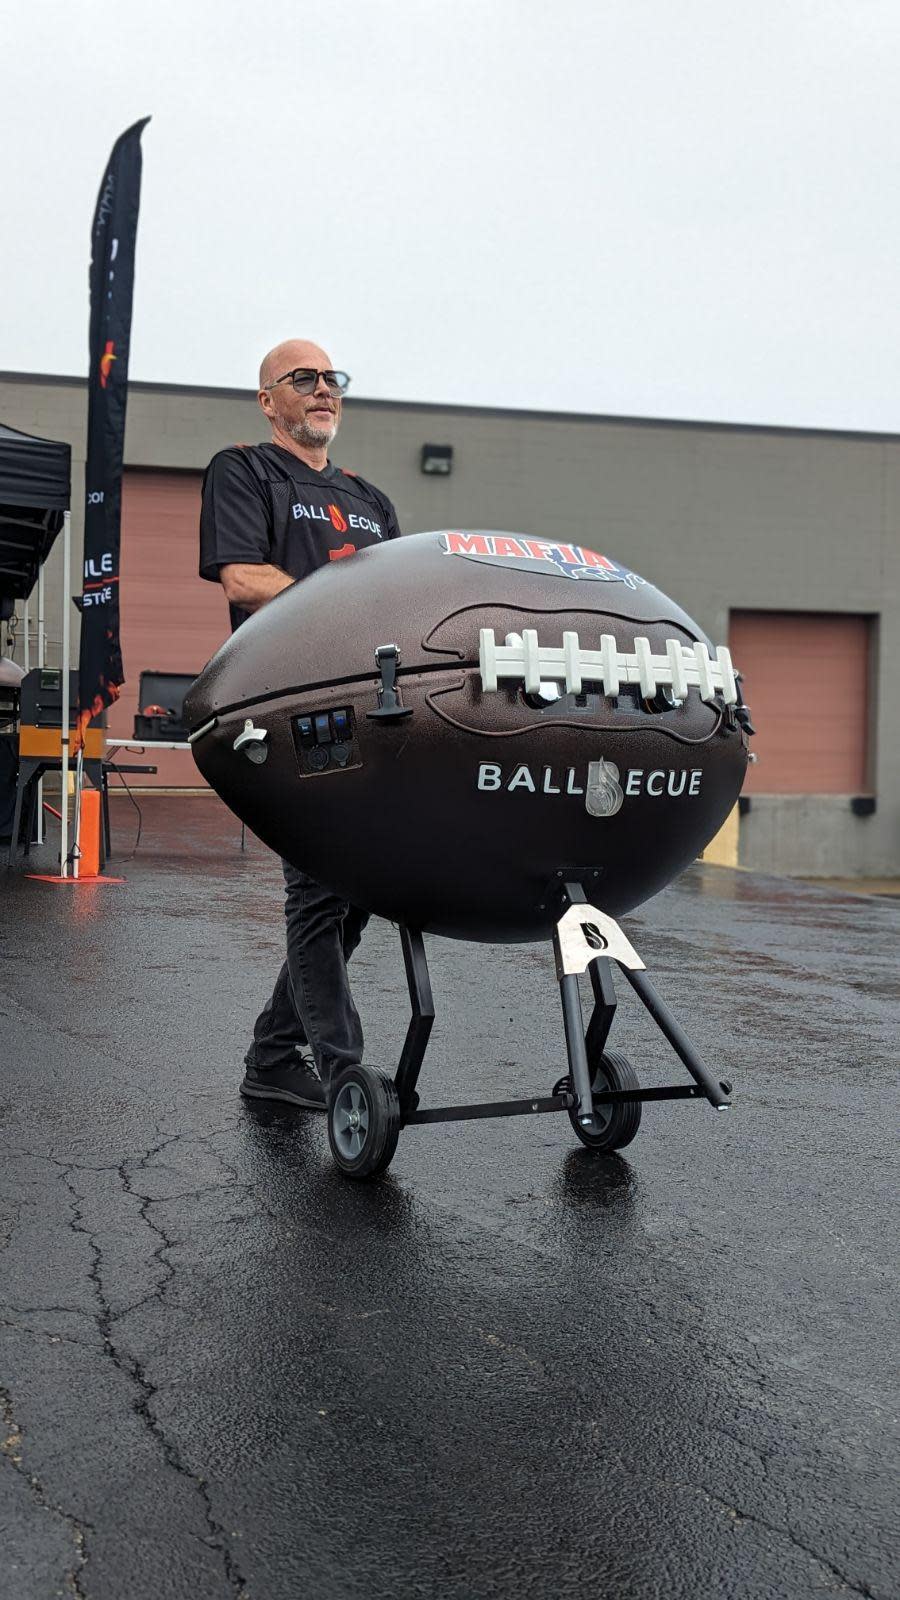 Stéphan Genest from Magog, Que., will be at the Super Bowl party this week showcasing the ballbecue he's worked on for the past 15 years.  (Submitted by Stéphan Genest - image credit)